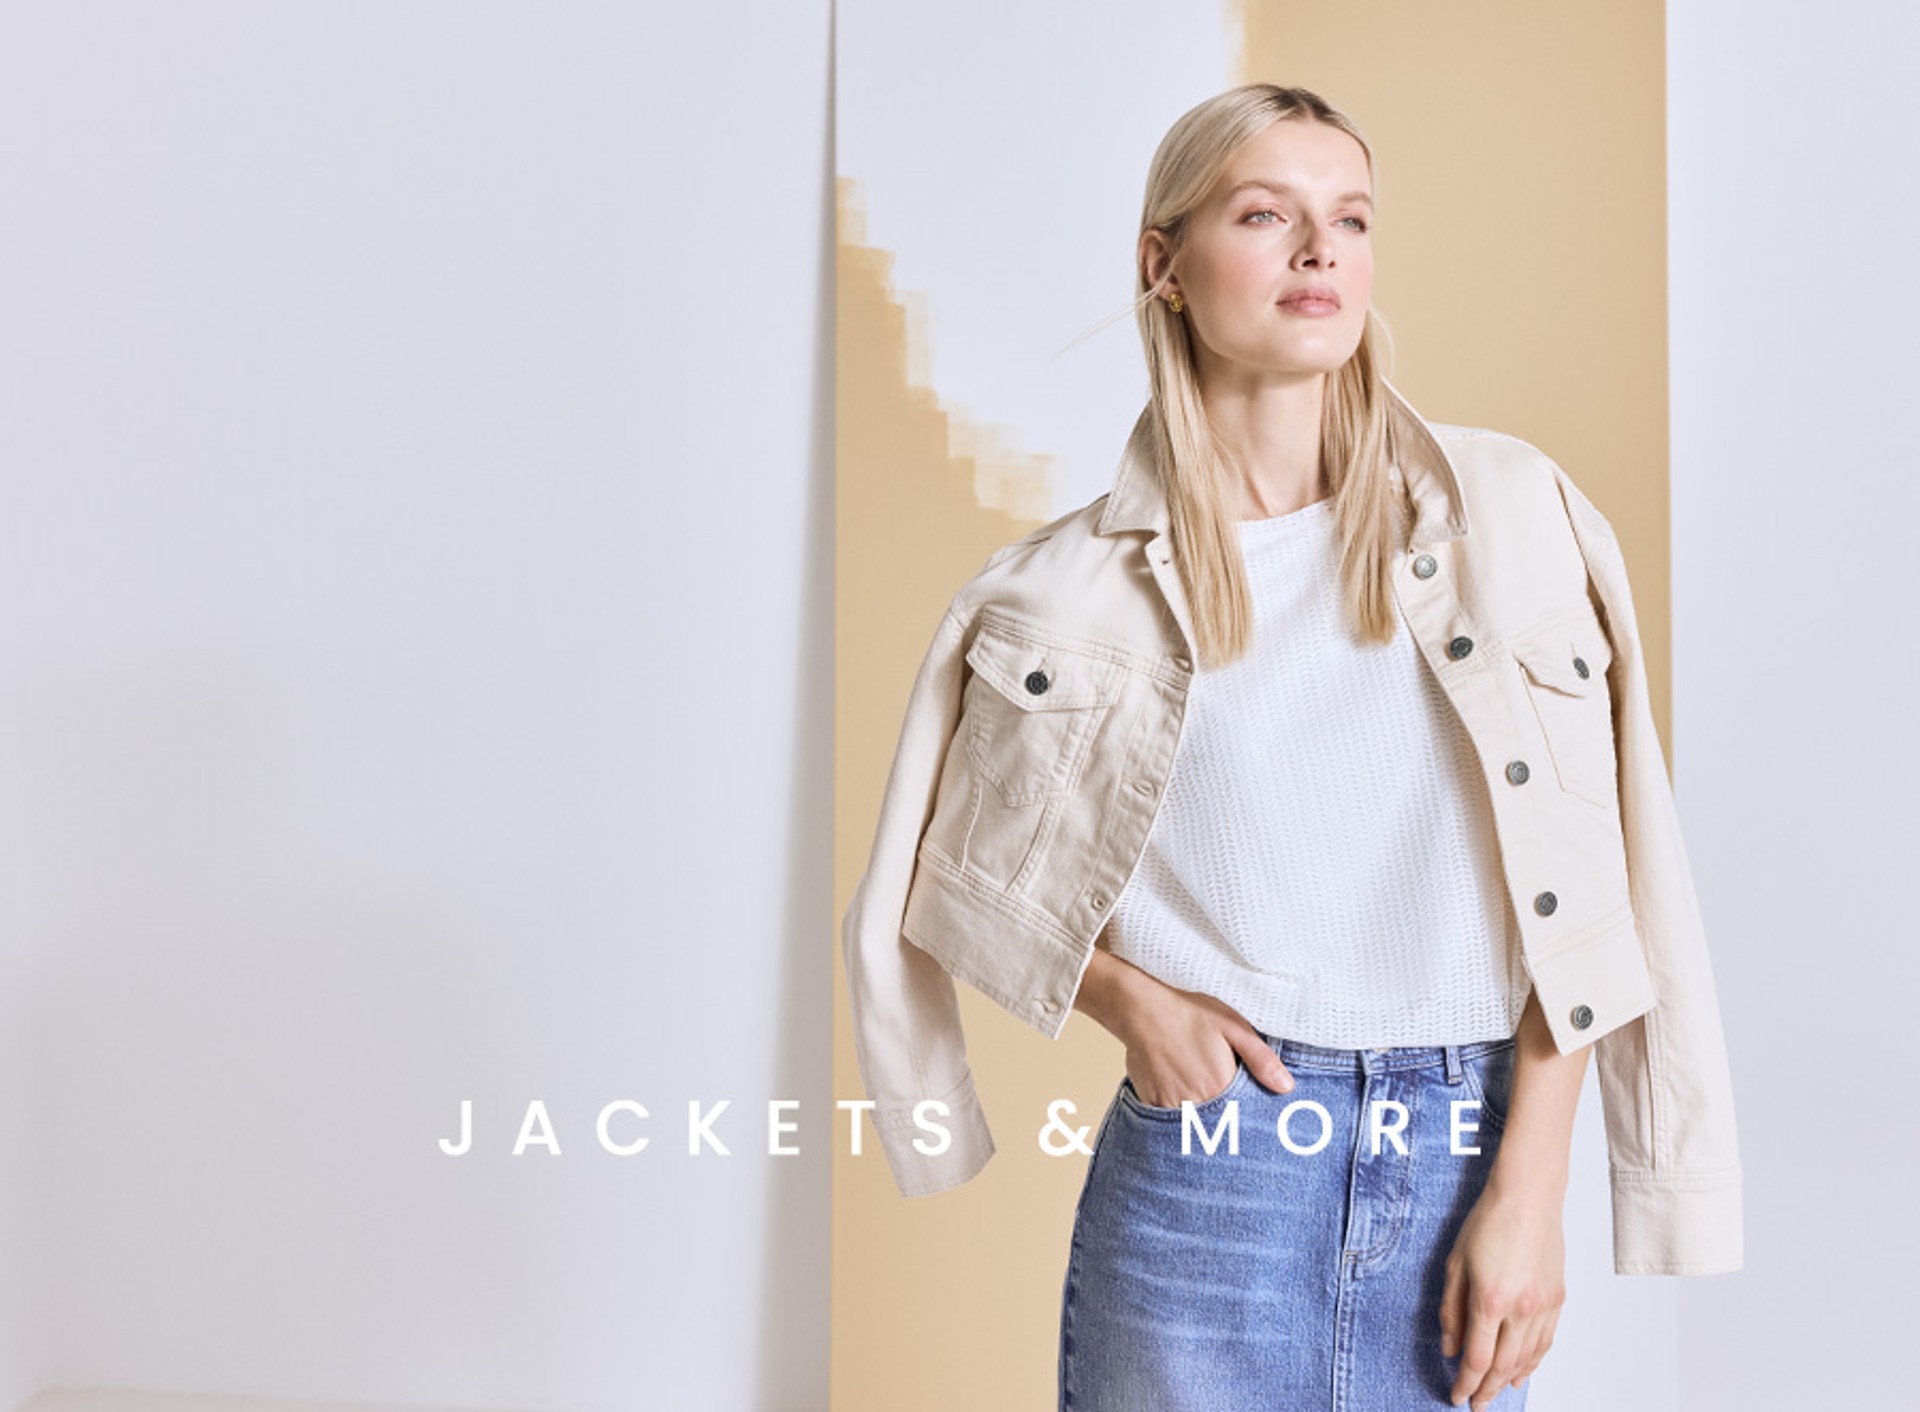 Jackets & more